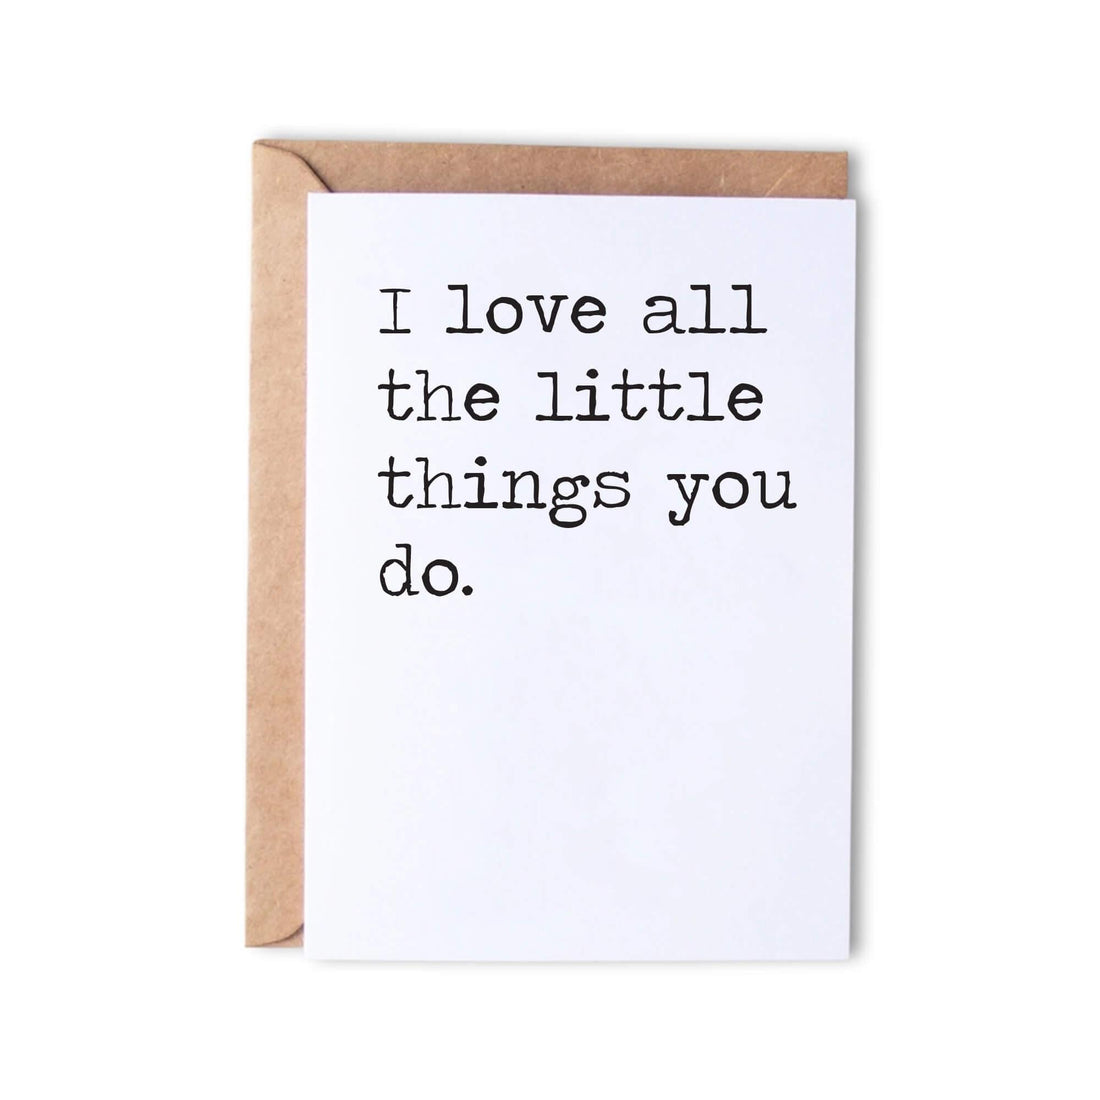 Love all the little things - Monk Designs